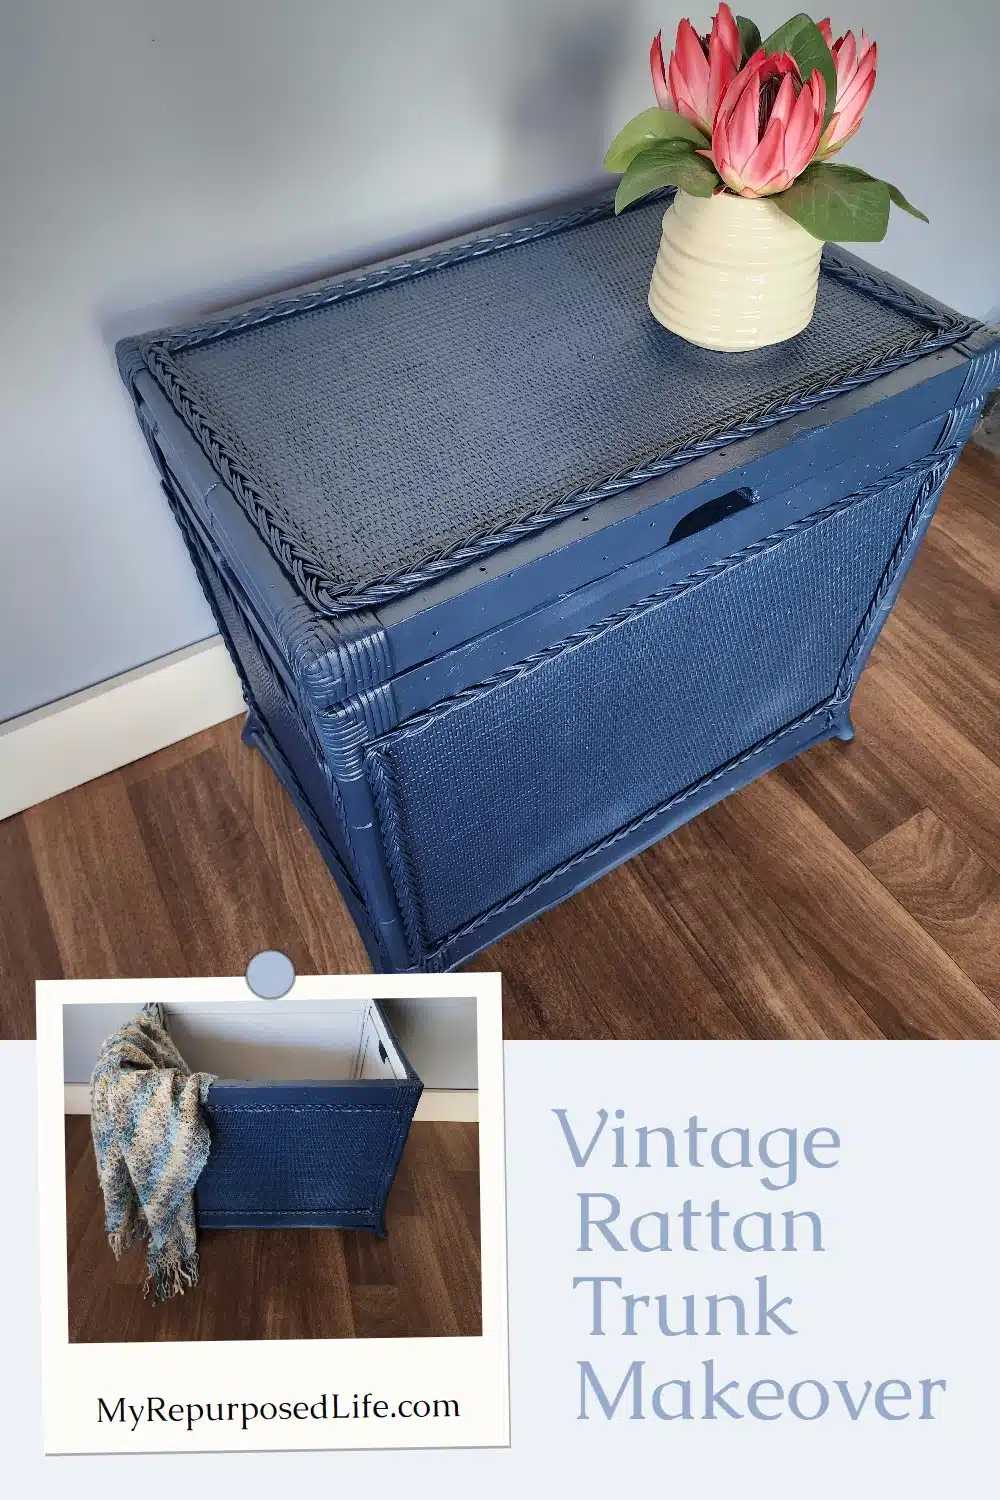 How to give a wicker or rattan trunk an easy makeover. Make repairs, prime, paint an outdated piece of wicker furniture. #MyRepurposedLife via @repurposedlife